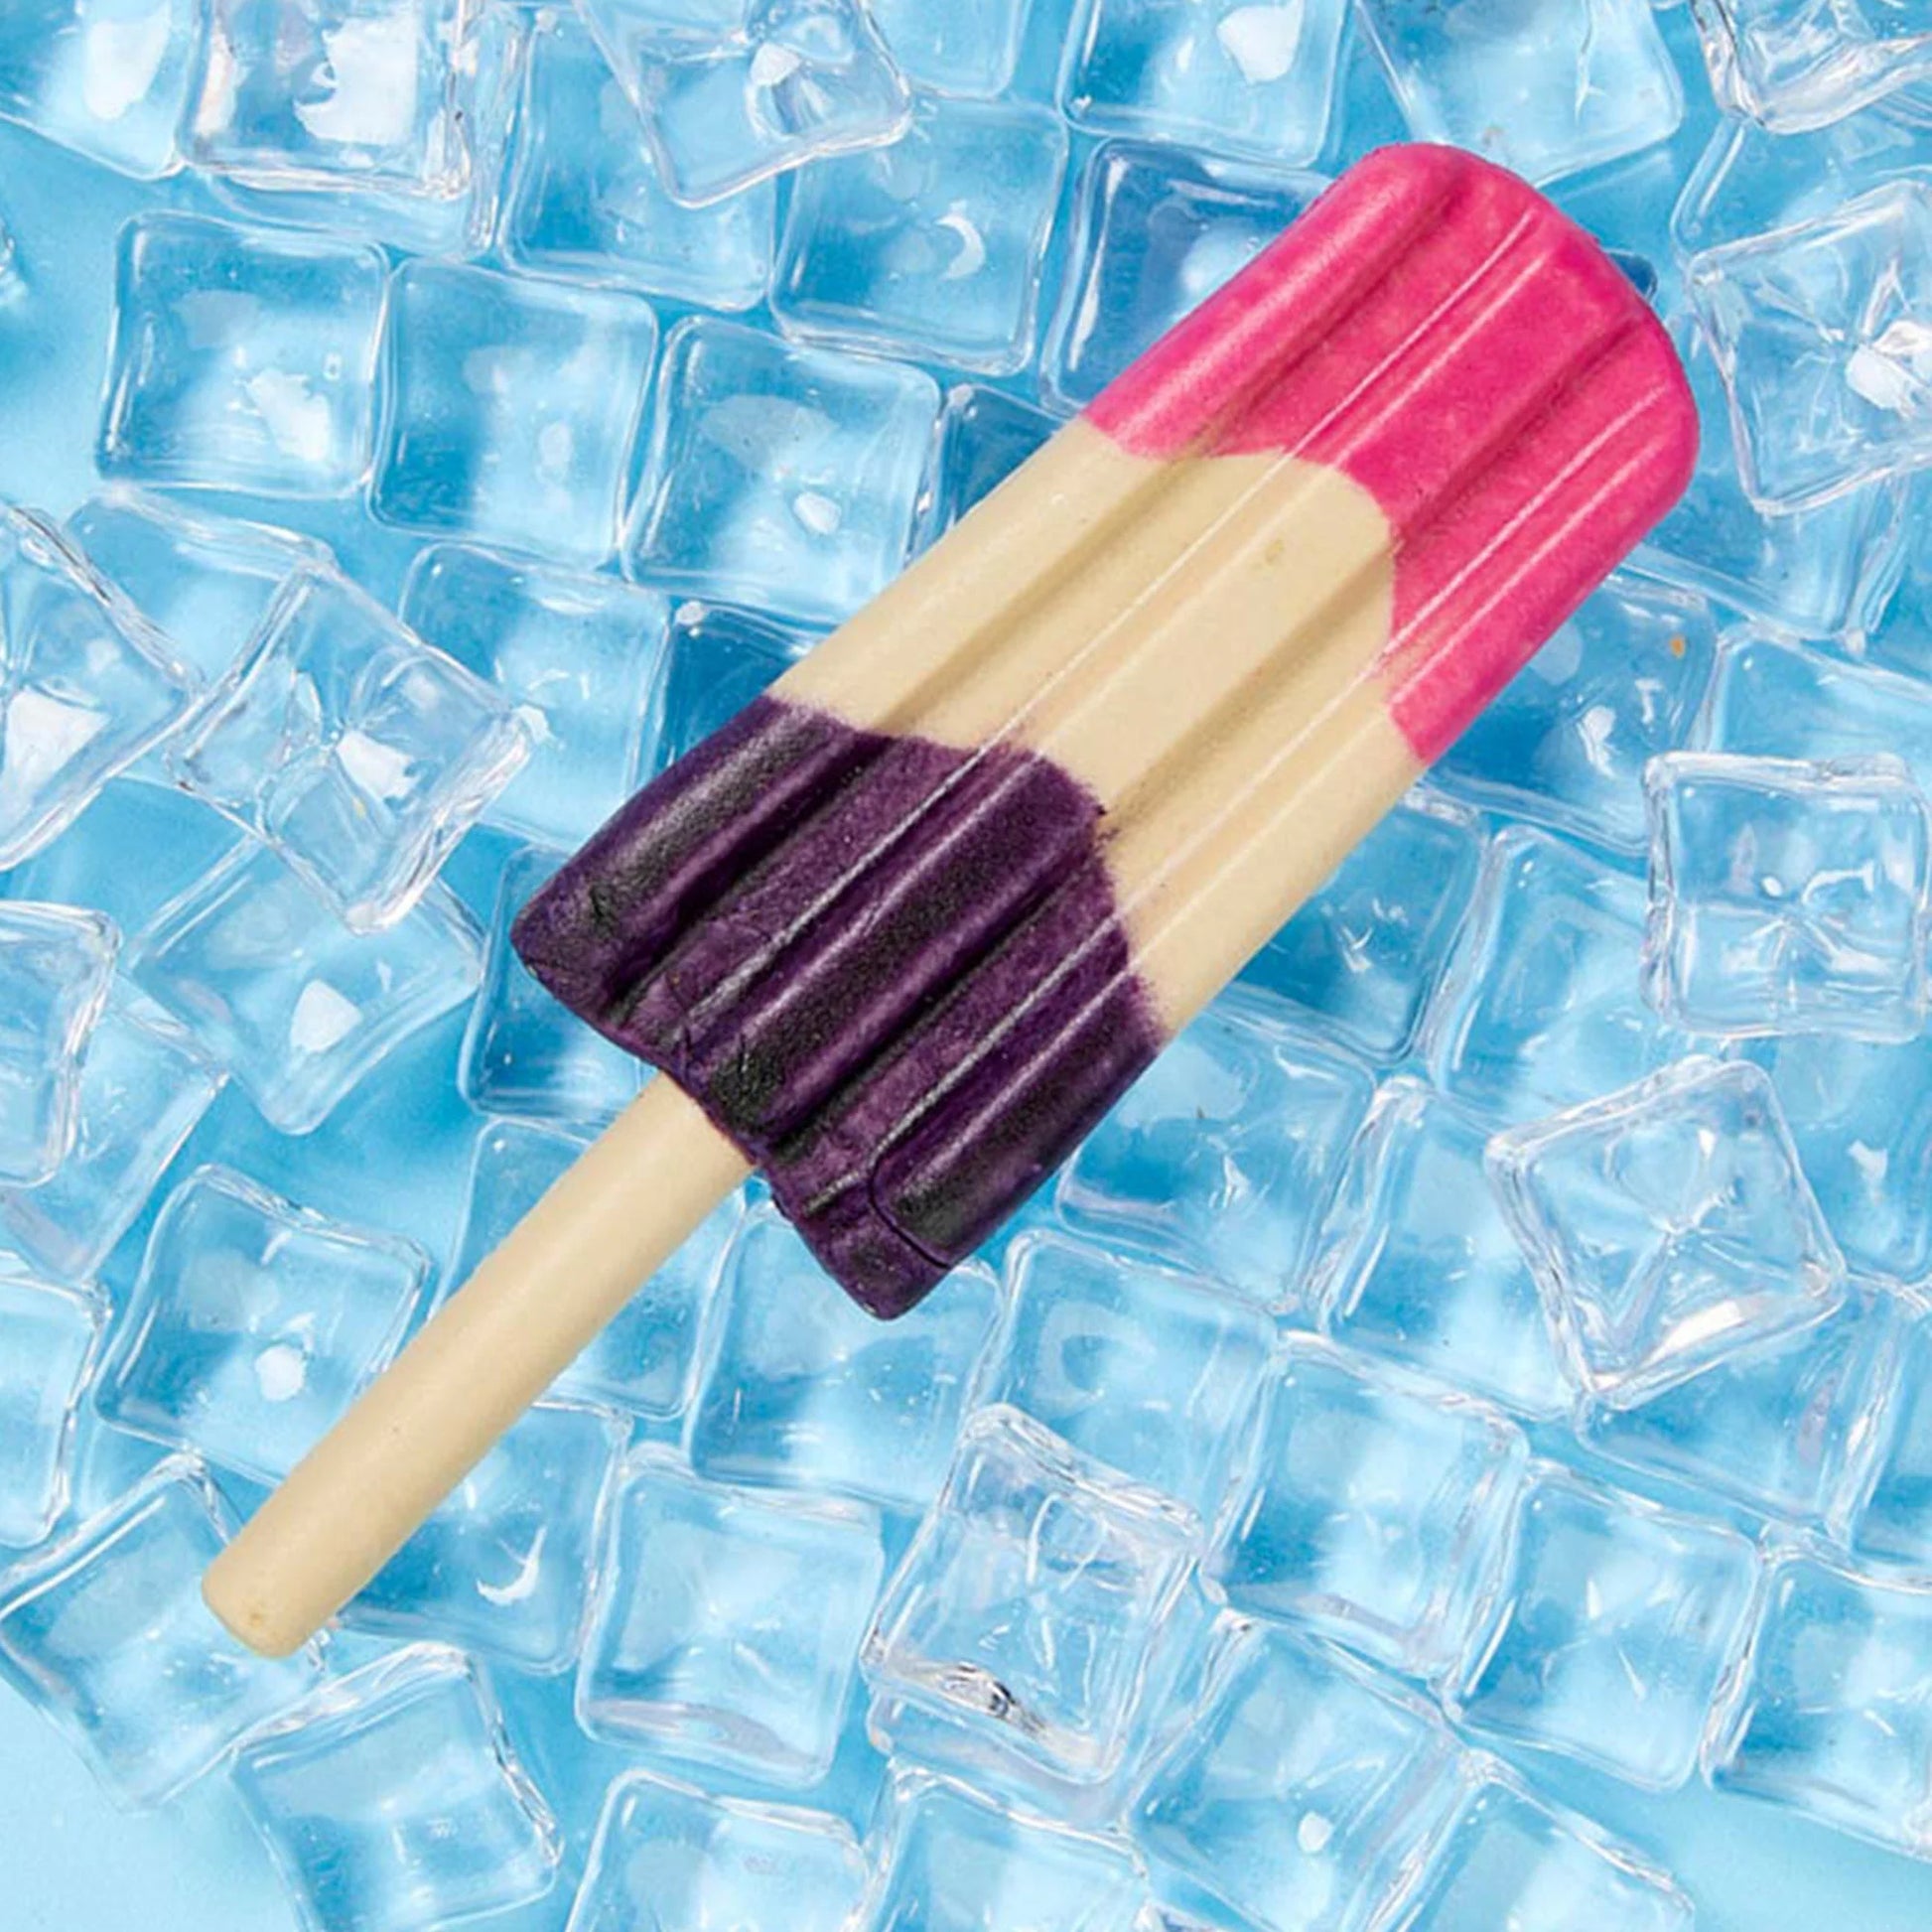 Pup Ice Rocket Lollies Strawberry & Blueberry Ready To Freeze Treat For Adult Dog - 90 gm - Heads Up For Tails